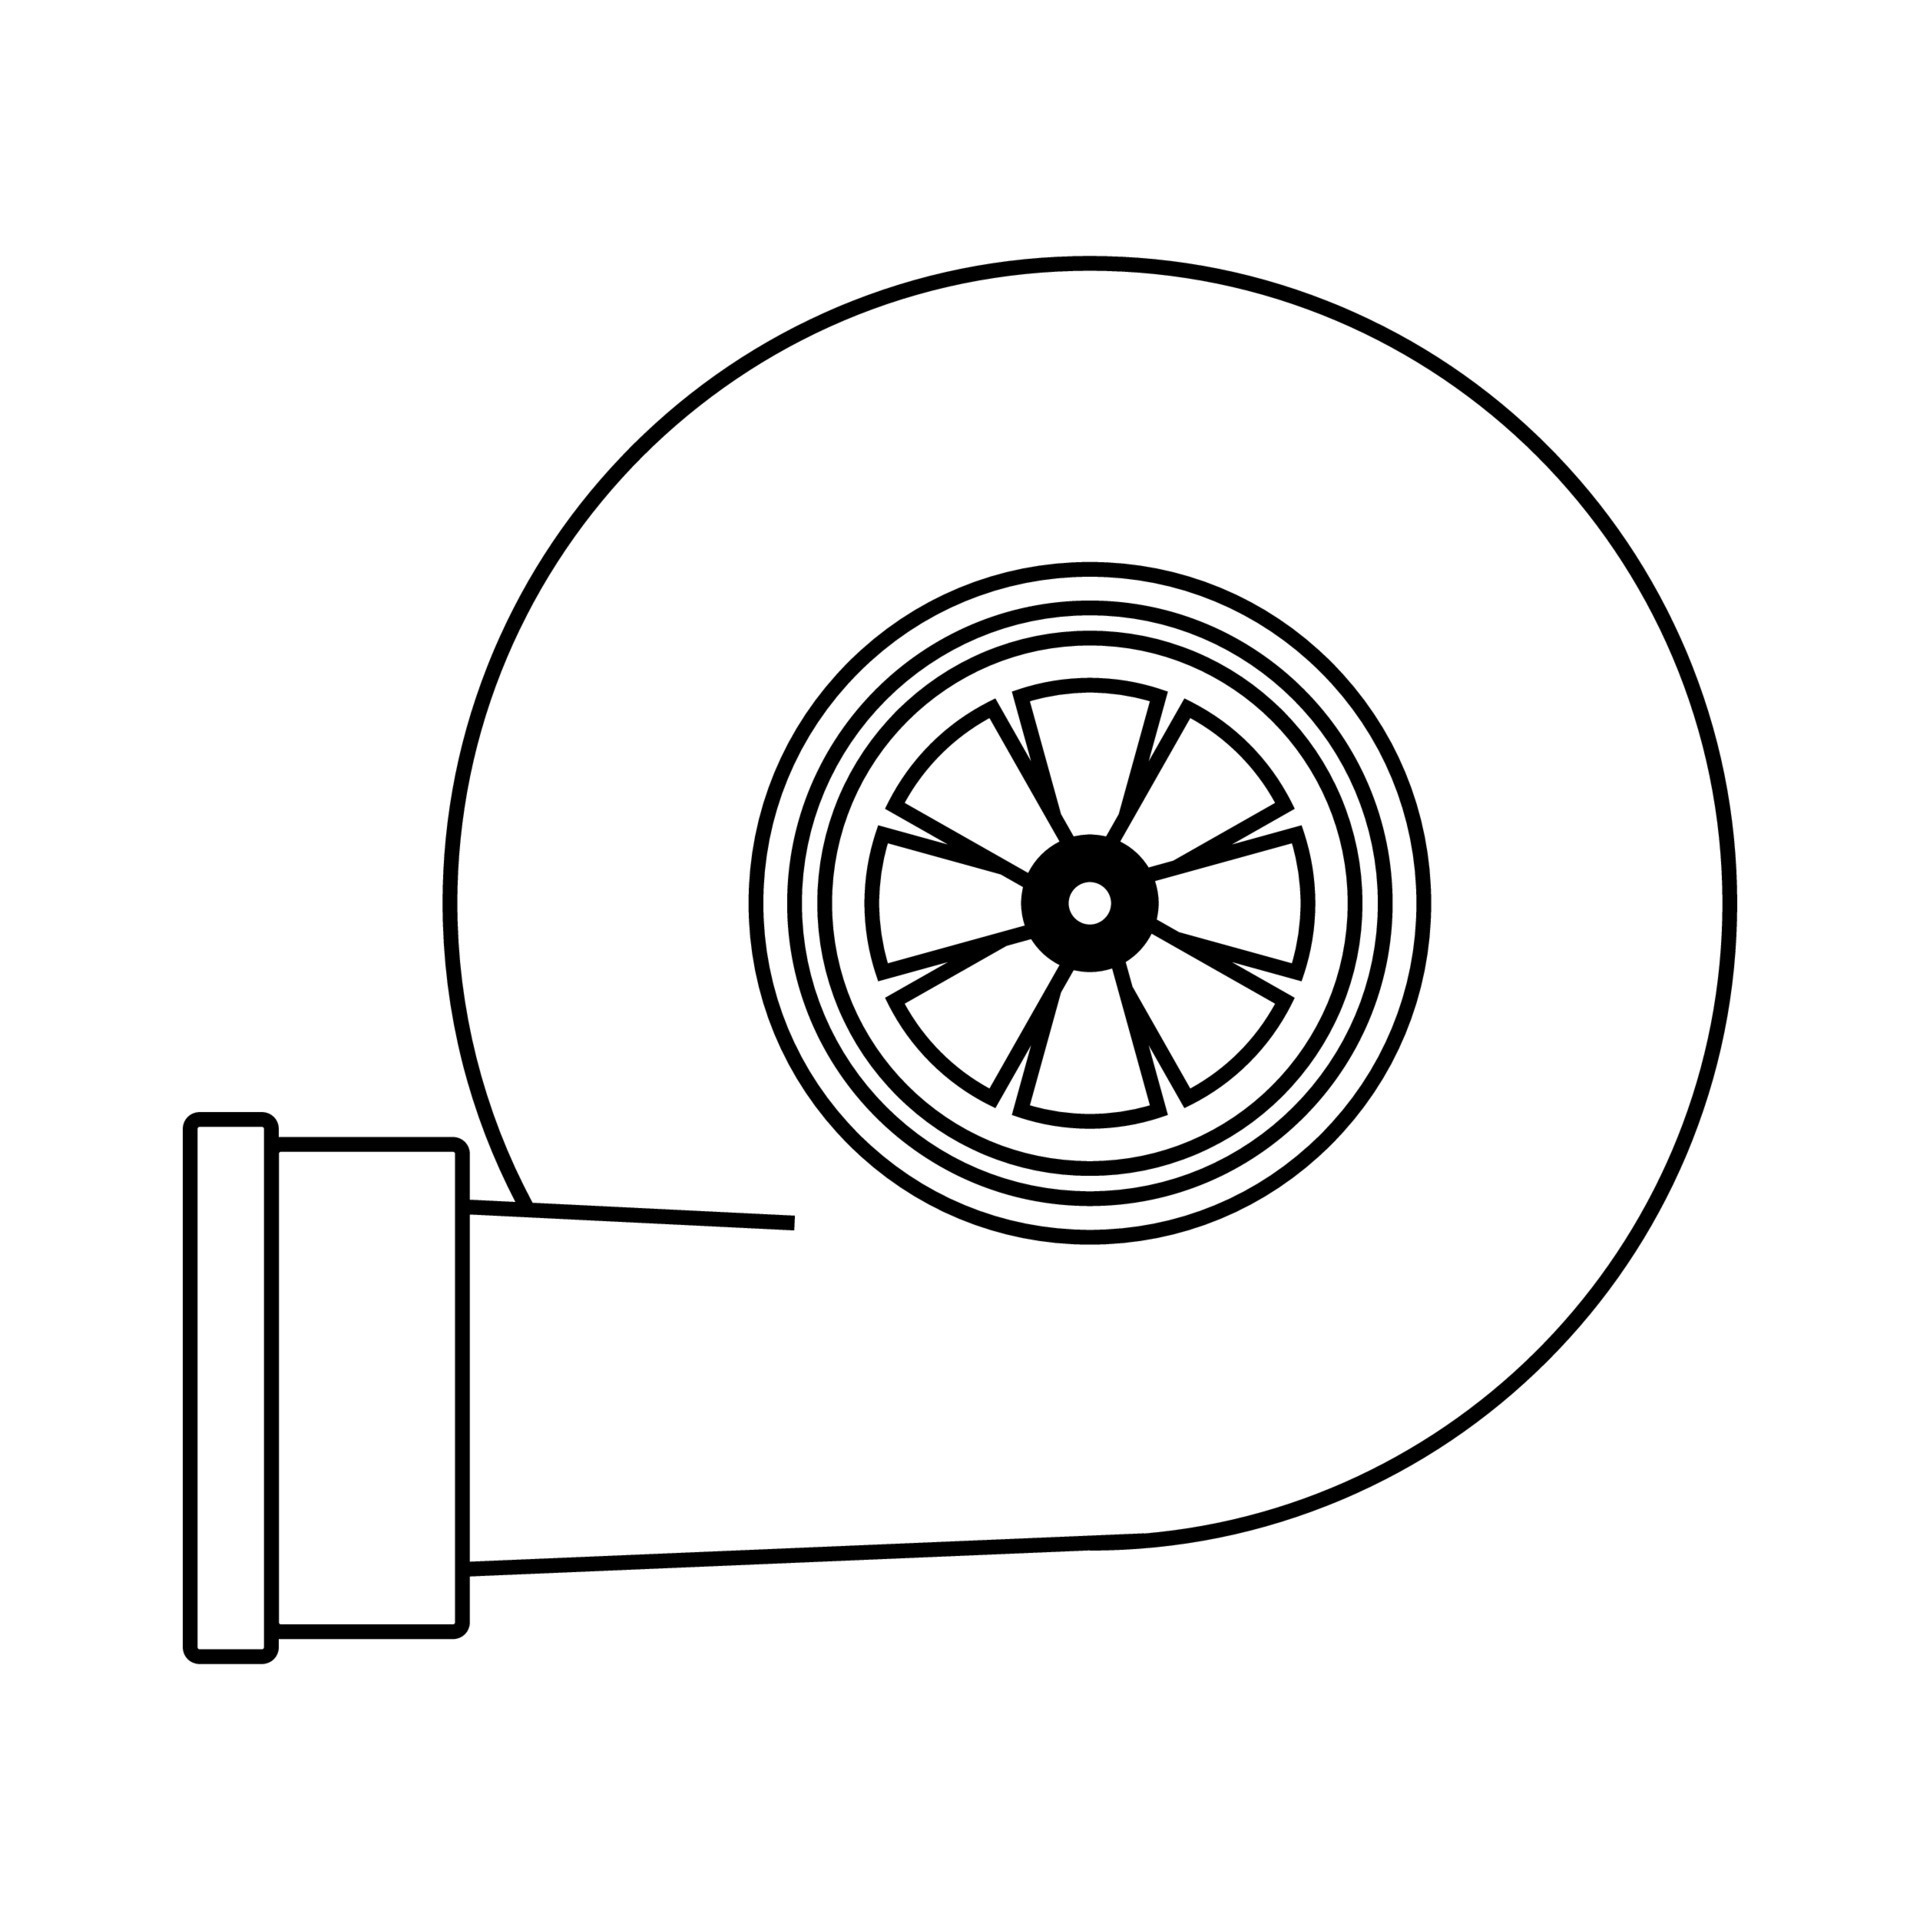 https://static.vecteezy.com/system/resources/previews/007/978/598/original/turbine-from-automobile-engine-line-illustration-of-car-motor-turbocharger-turbo-outline-sign-icon-free-vector.jpg